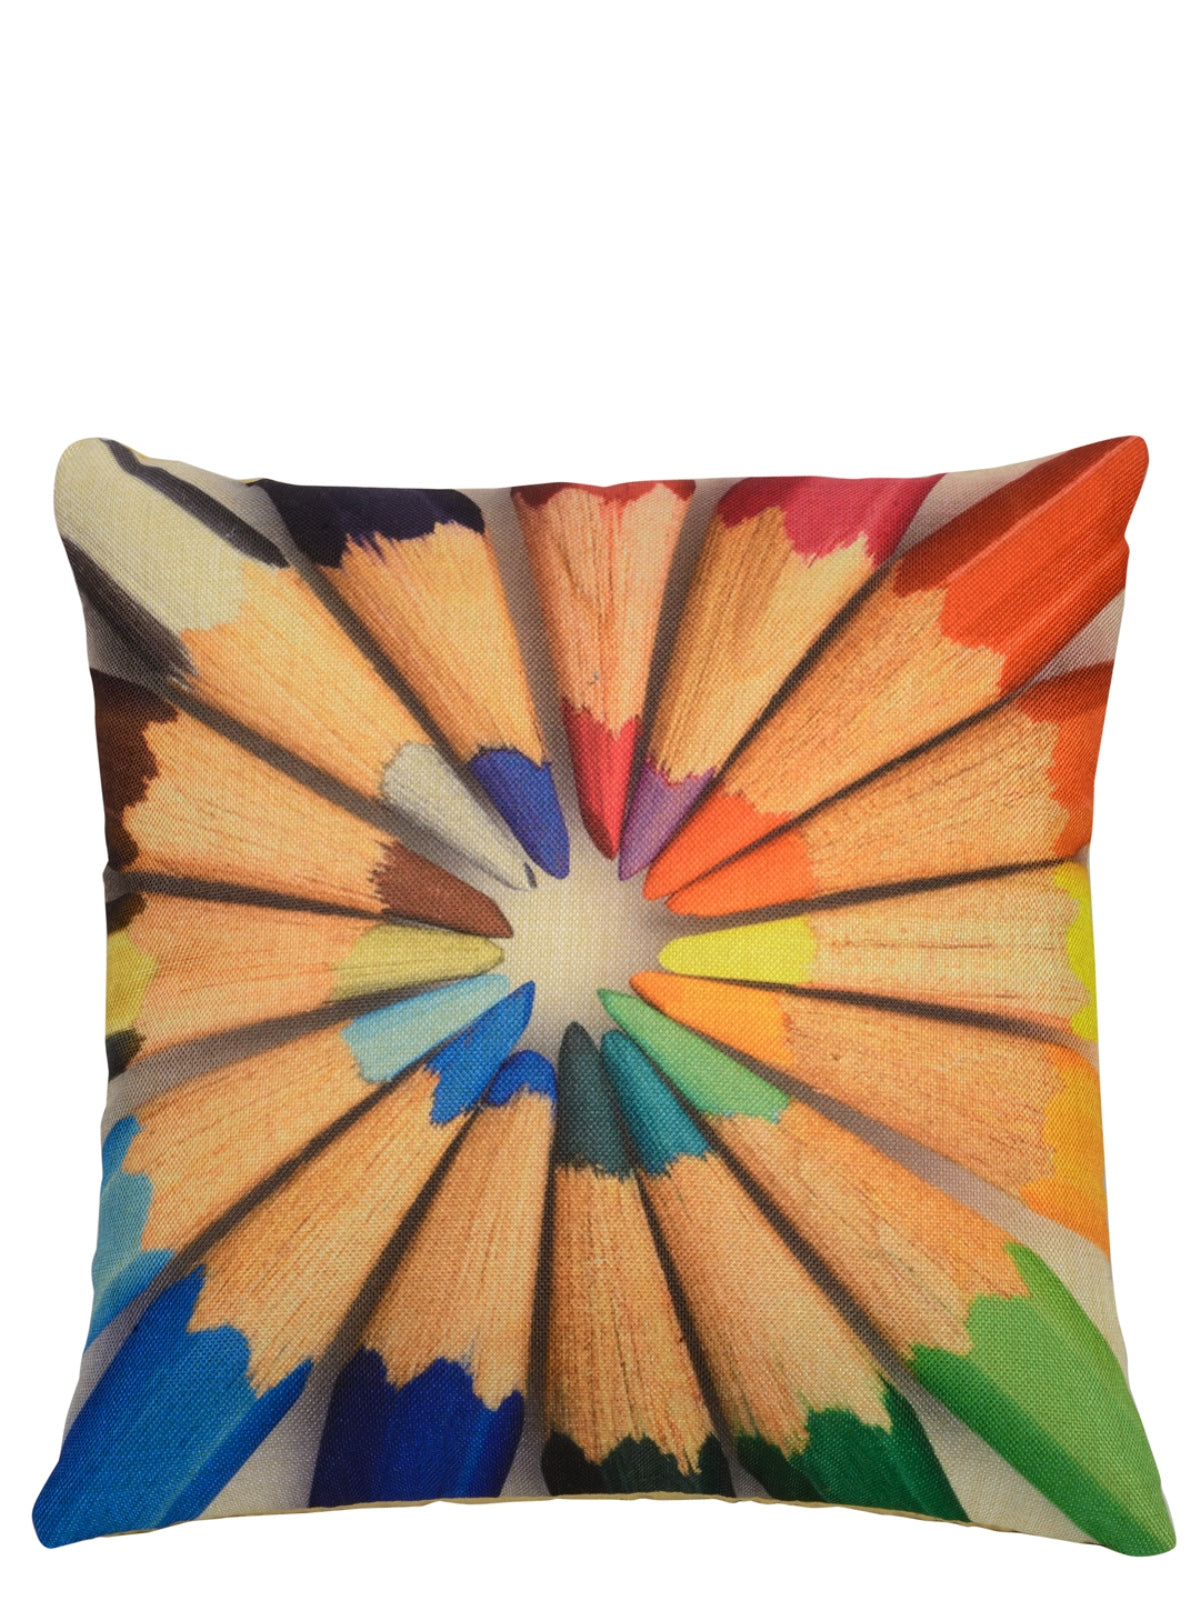 Soft Jute Abstract Print Throw Pillow/Cushion Covers 40cm x 40cm Set of 5 - Multicolor